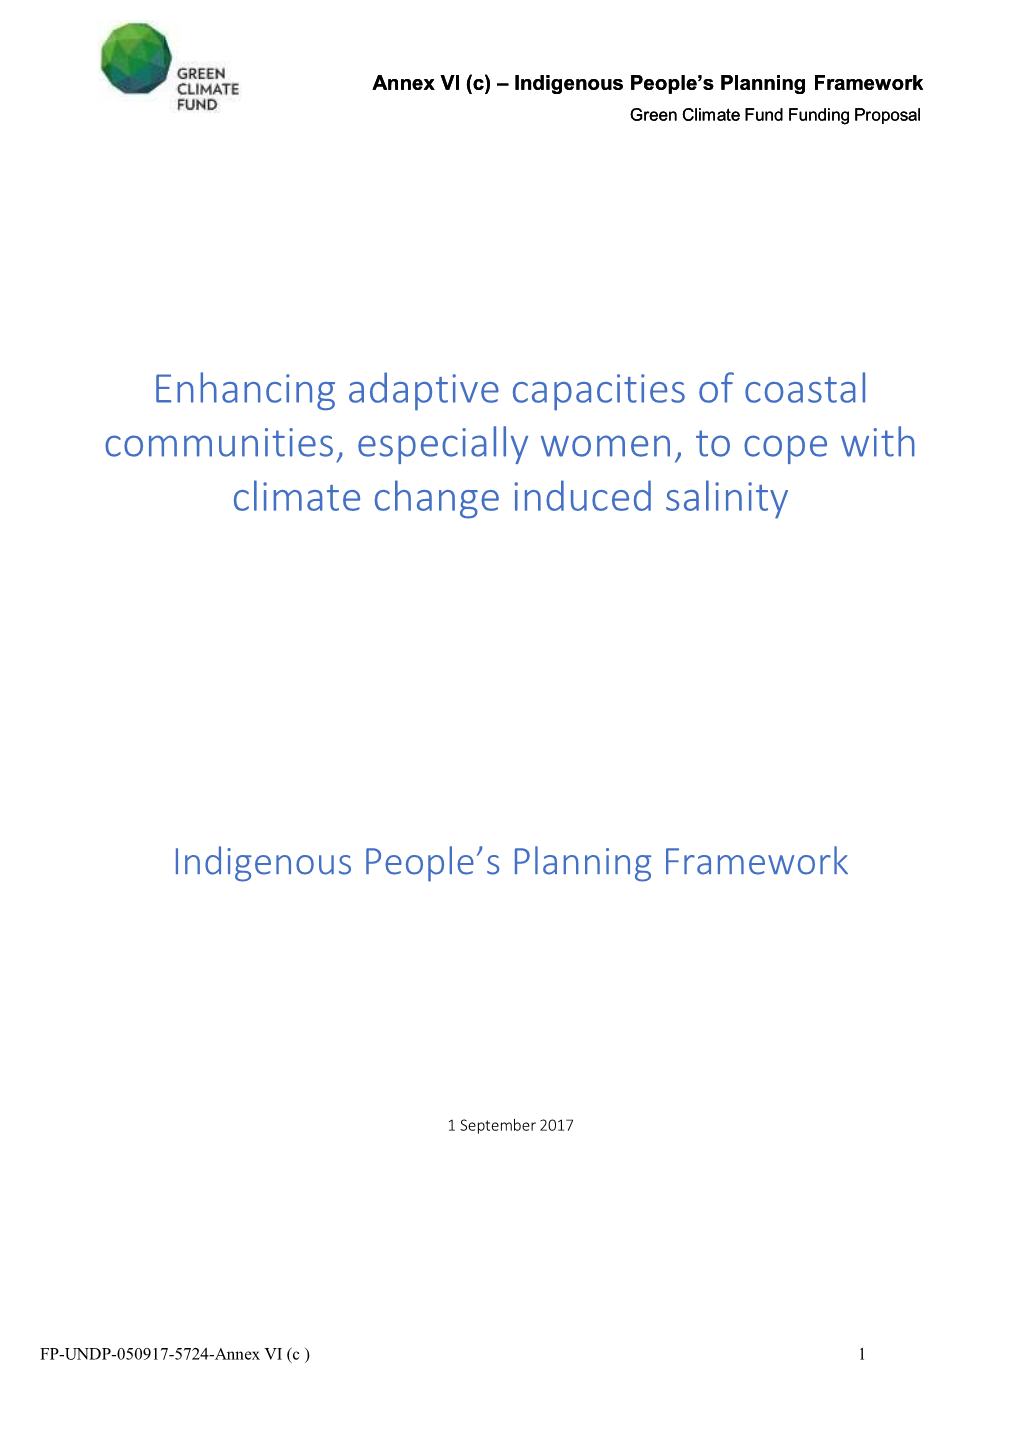 Enhancing Adaptive Capacities of Coastal Communities, Especially Women, to Cope with Climate Change Induced Salinity